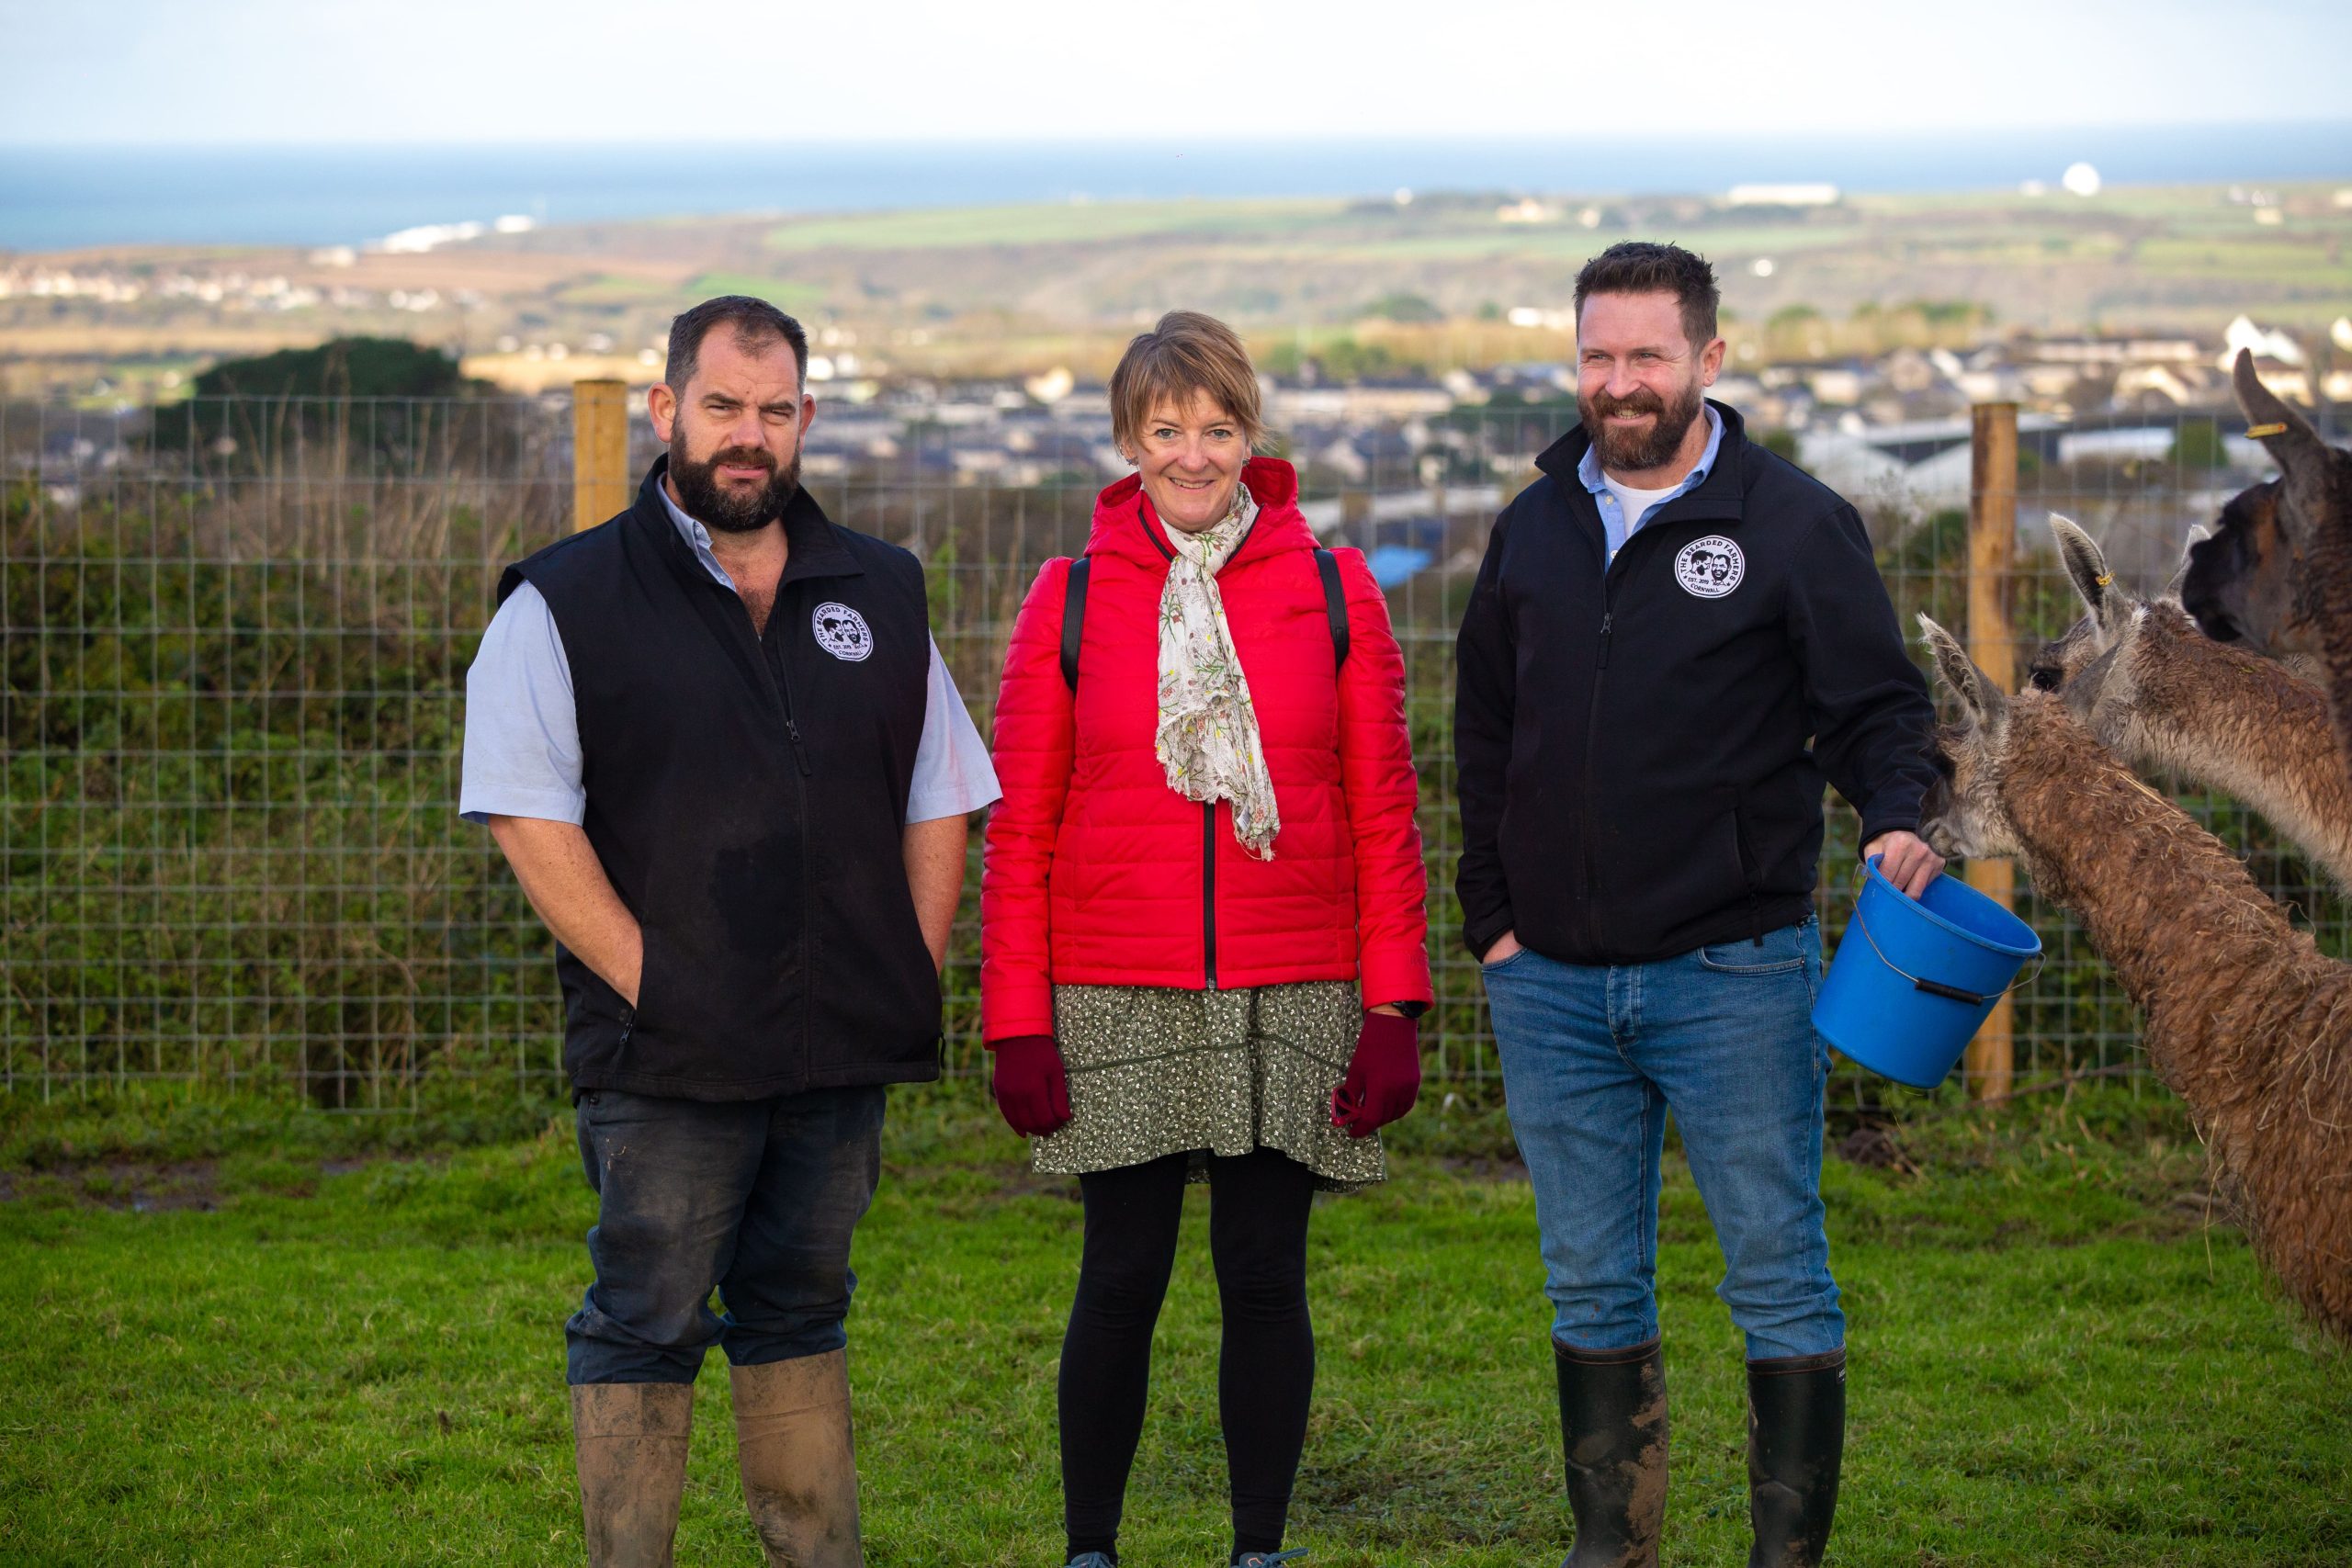 Funding Boost for Cornish Holiday Cleaning Business